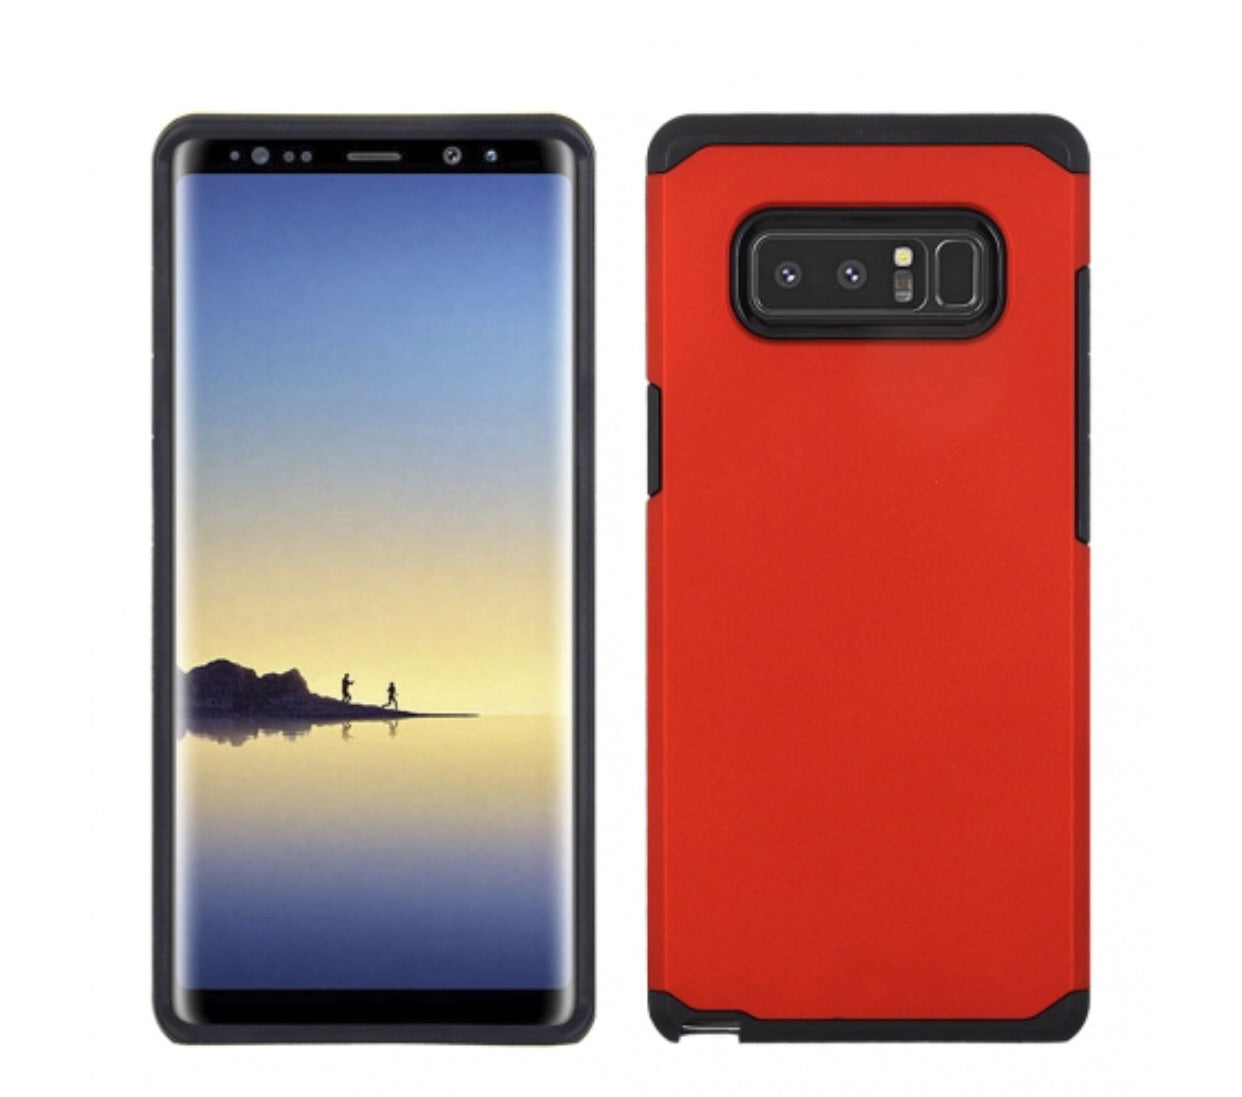 SAMSUNG GALAXY NOTE 8 - SOLID RED HONEY LEATHER BACK COVER ON BLACK TPU SKIN